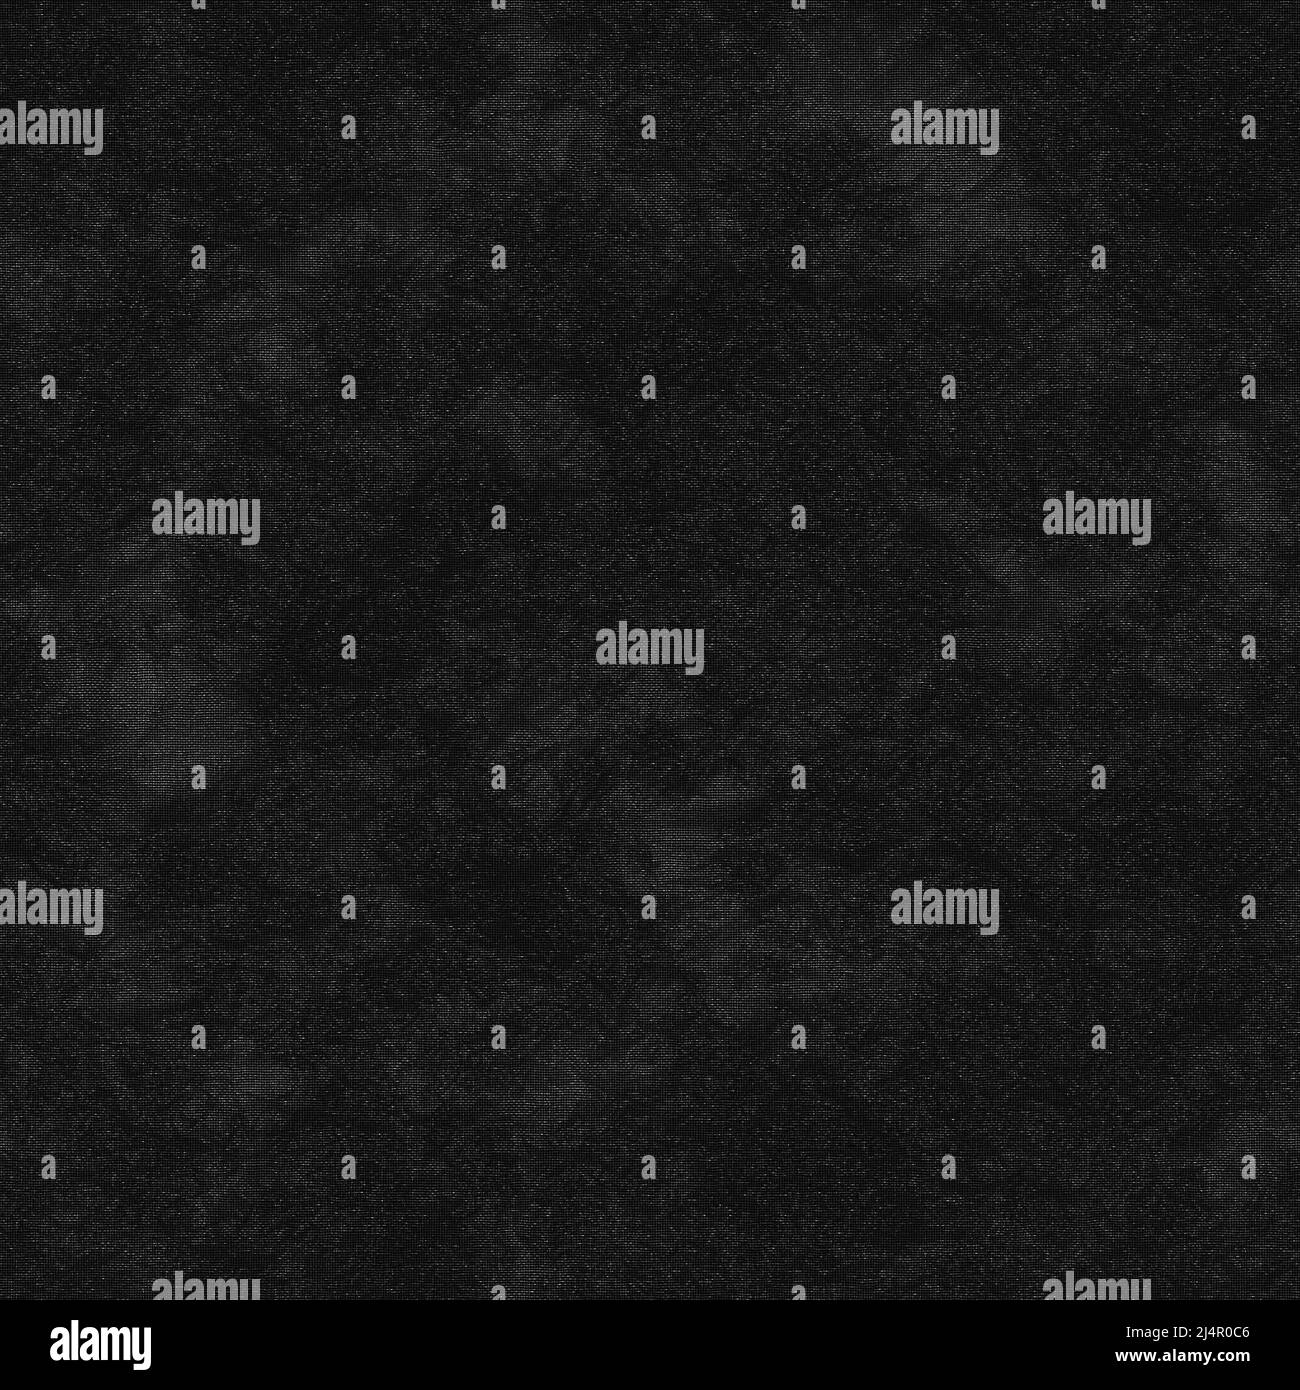 Bump texture Fabric, bump mapping texture Cloth and Fabric Stock Photo ...